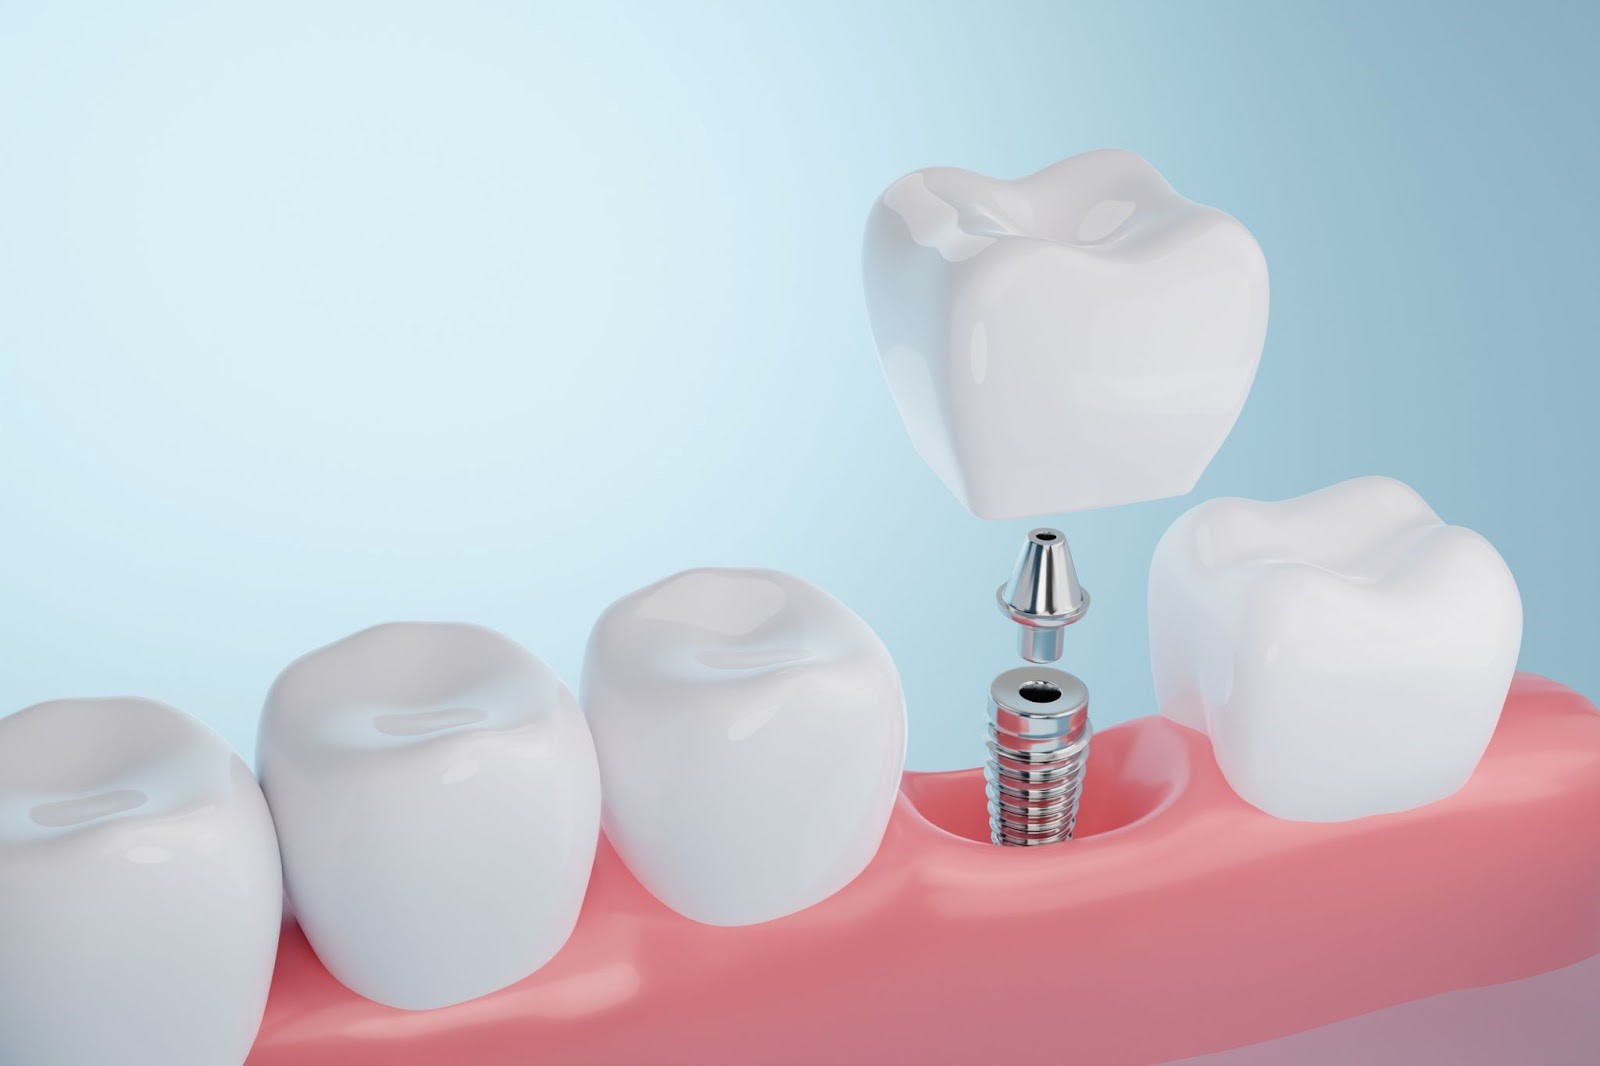 Dental Implants: Everything You Need To Know